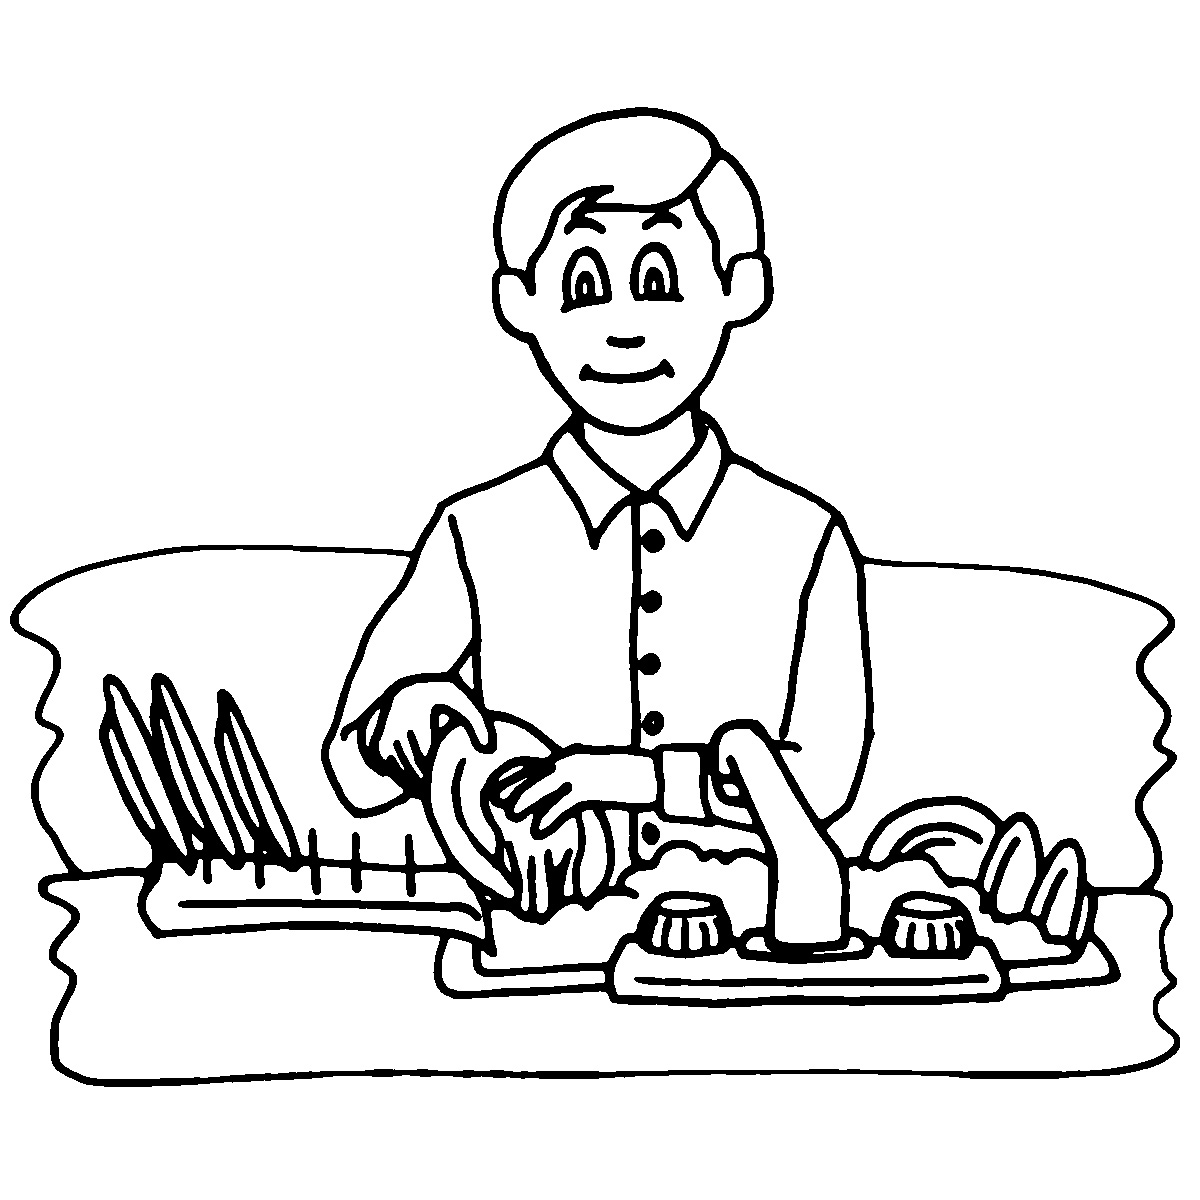 Doing dishes clipart